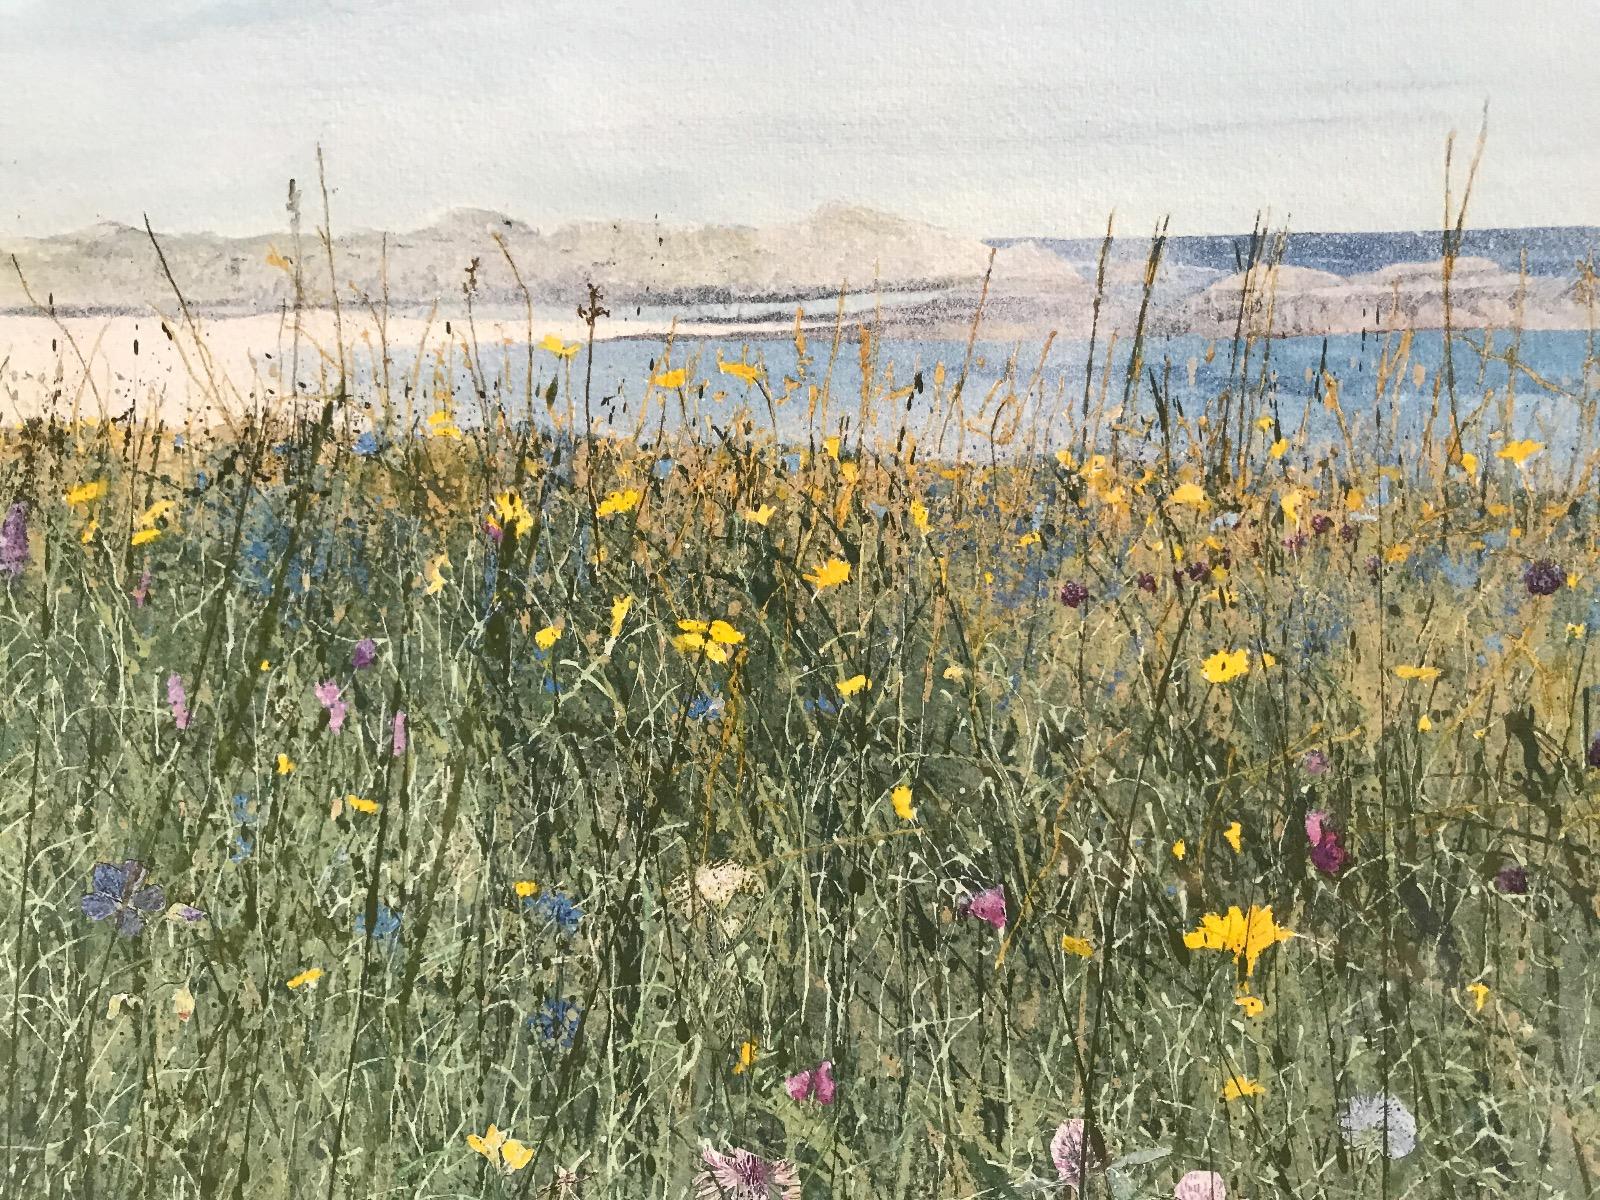 Judith Yarrow. Sea-meadow. This is a limited edition Giclee print of 100, of exceptional quality, using light fast inks on Albrecht Durer fine art paper, with accurate colour matching to the original. It is numbered and signed front and back. This